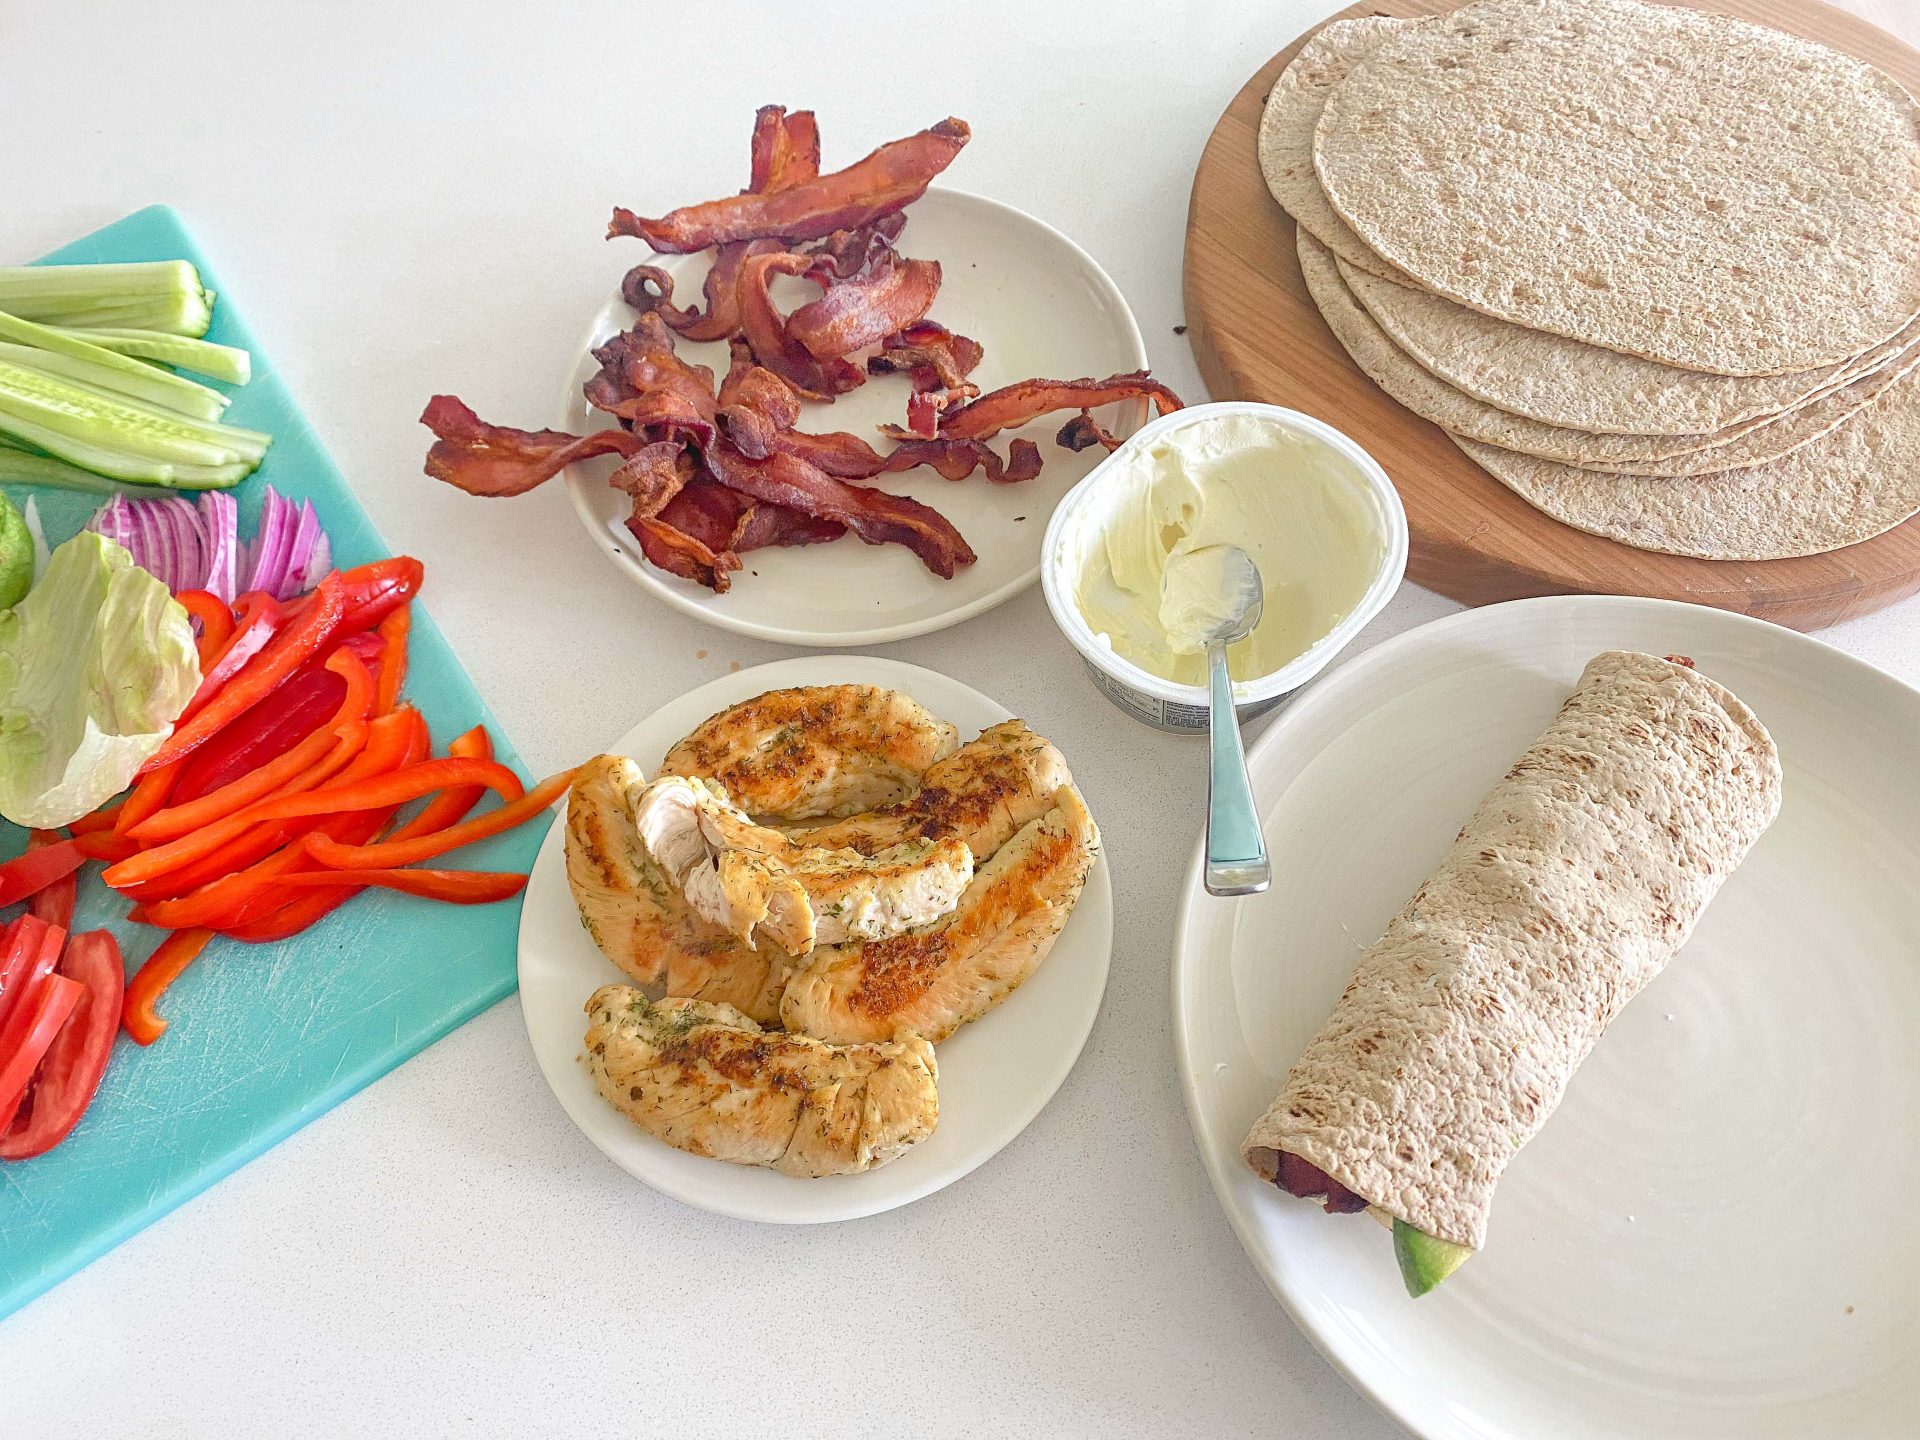 low carb multigrain wraps, lettuce, veggies, bacon, lunch, meal prep, cream cheese, chicken, ranch, healthy meal wraps, lunch ideas, wraps for lunch, wraps to go, easy on the go meals, travel ideas, travel food, bacon, cream cheese, low carb, keto, diet